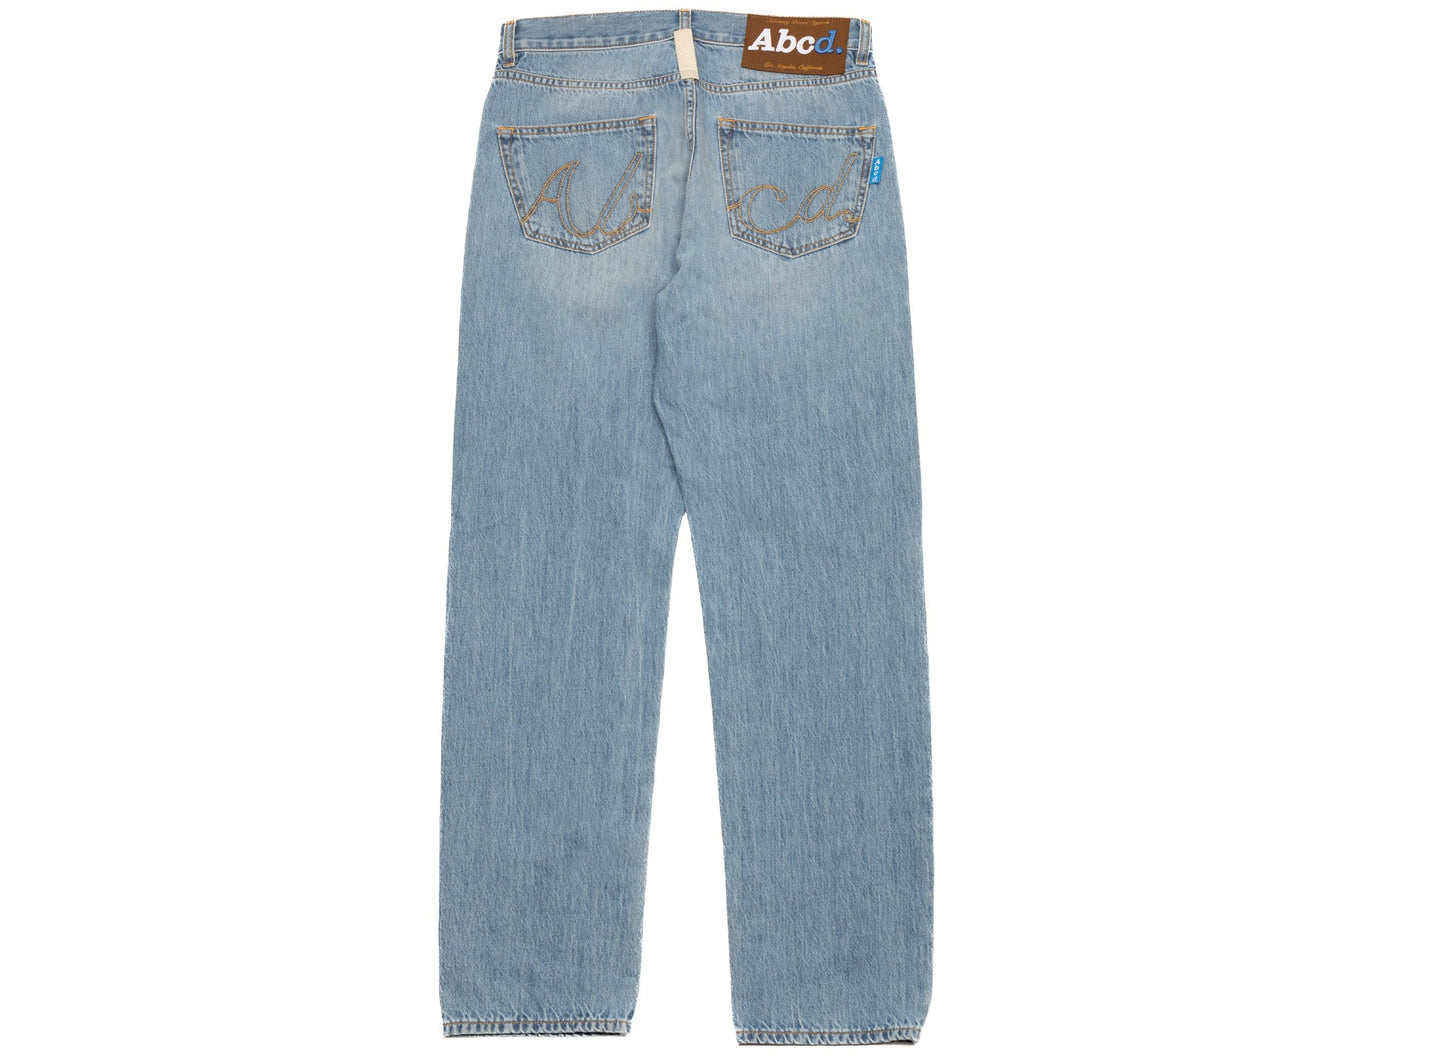 Advisory Board Crystals Abcd. Original Fit Jeans in Light Blue